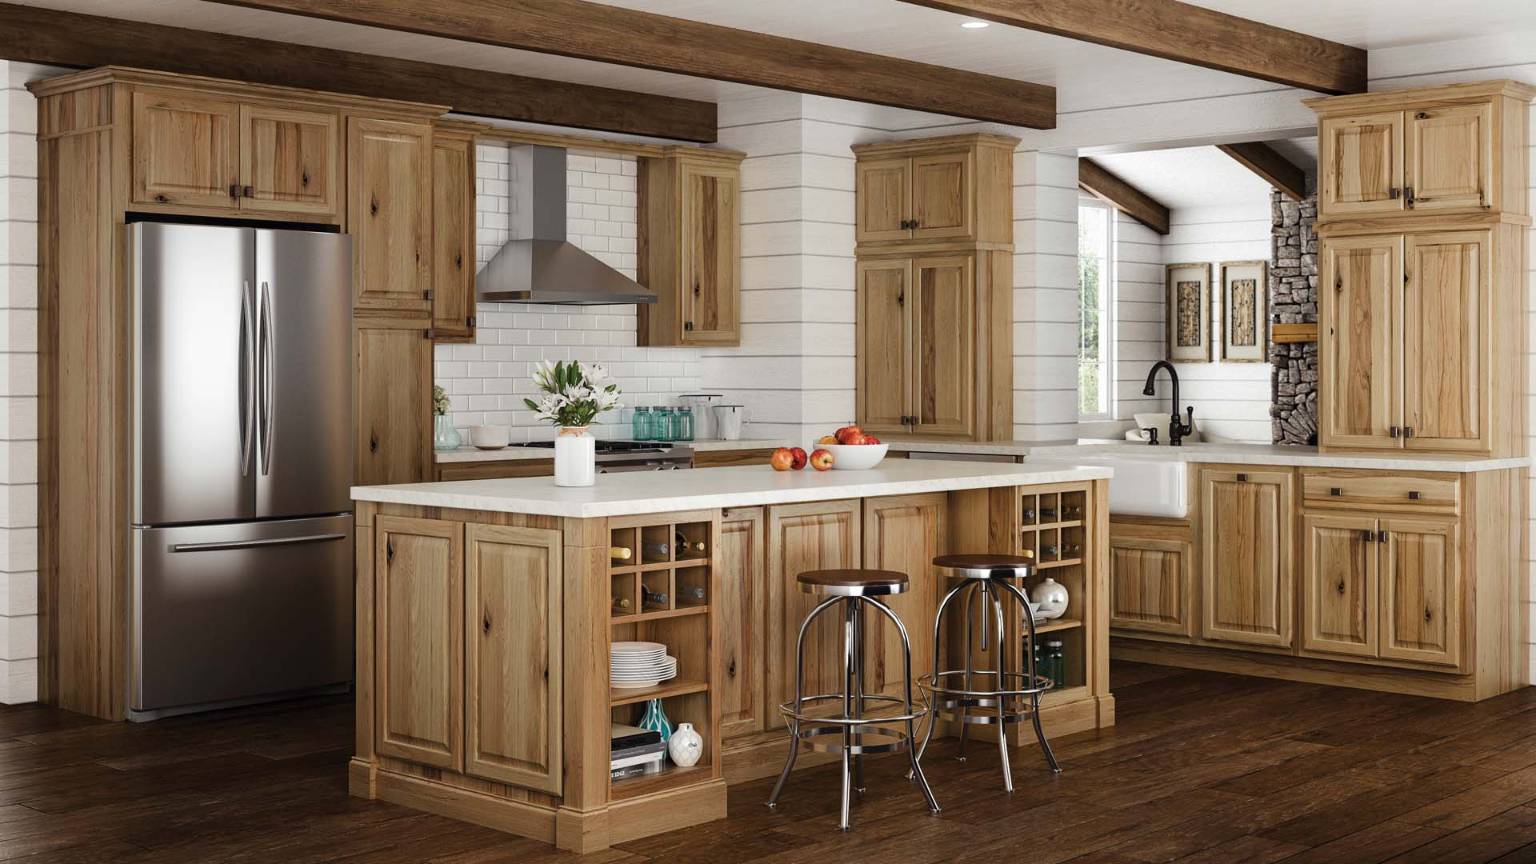 Hickory wood kitchen cabinets